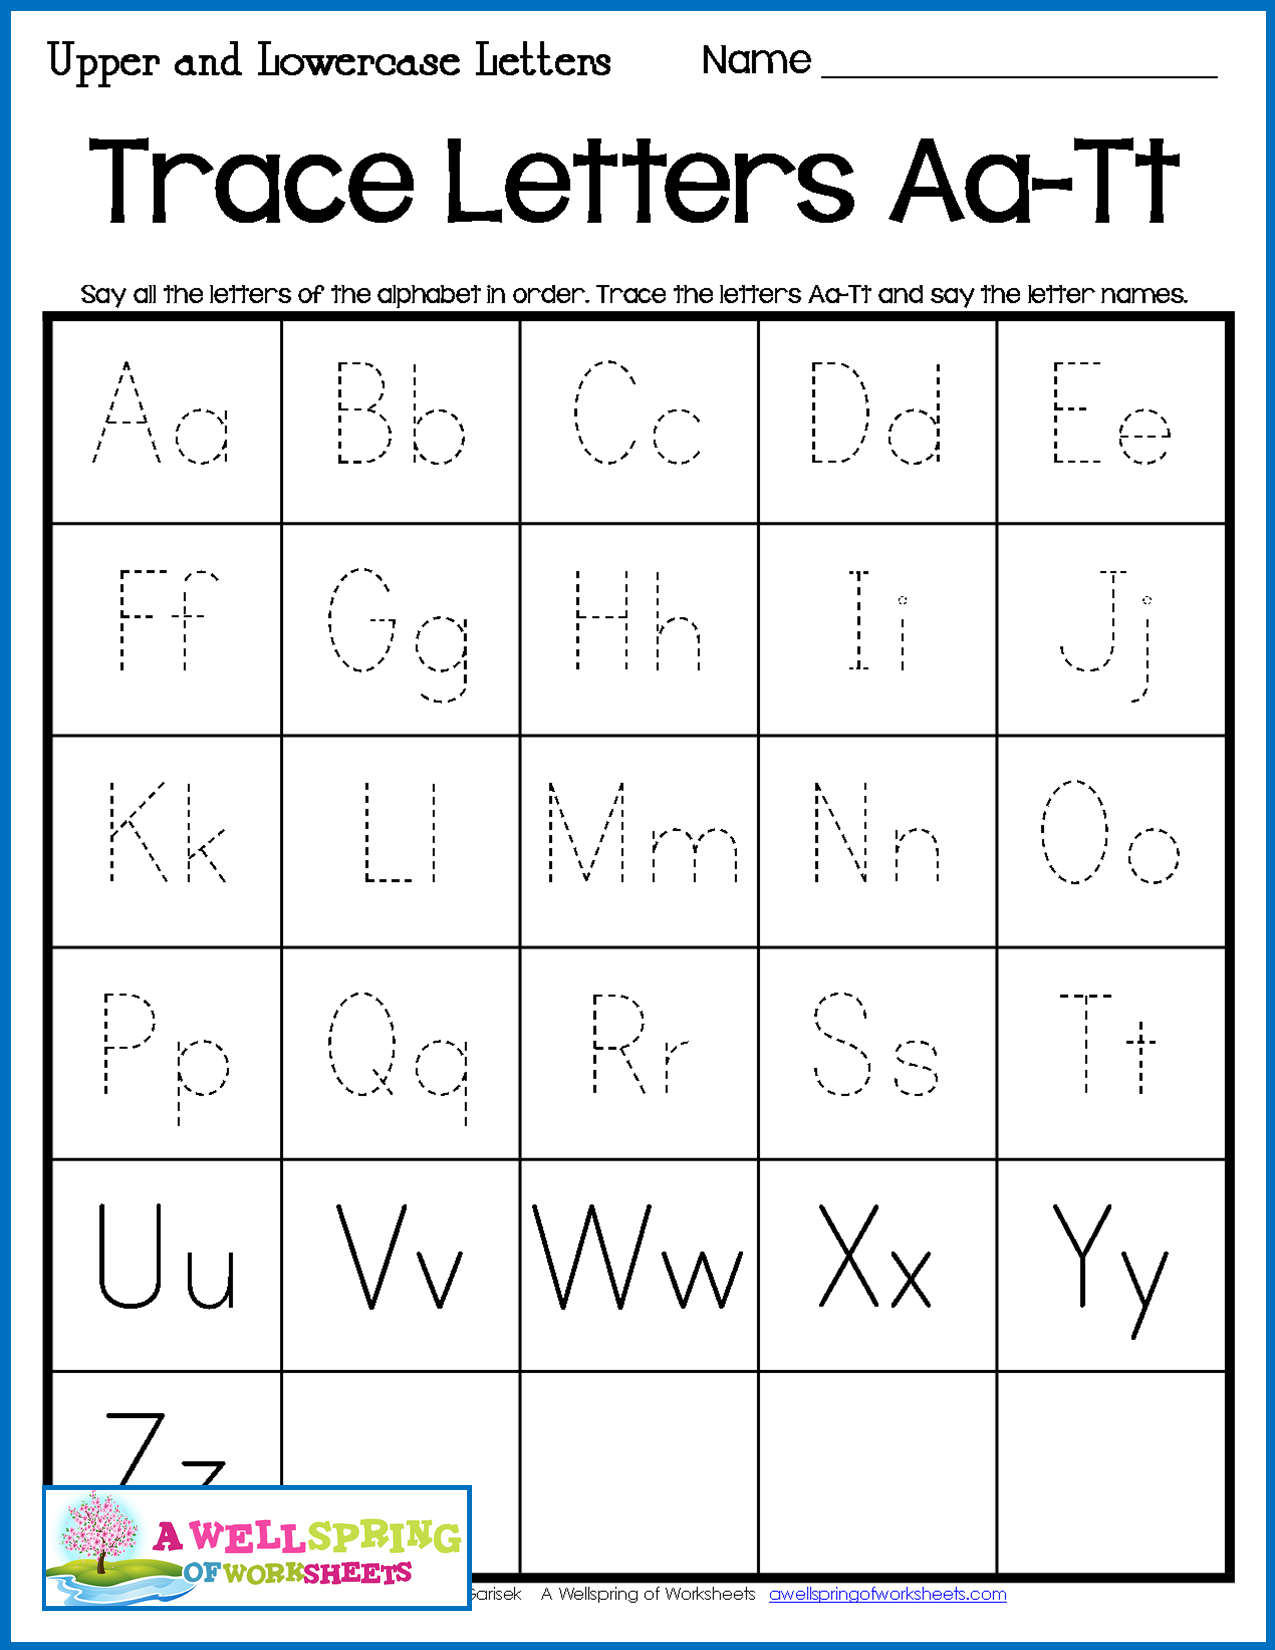 Alphabet Tracing Worksheets - Uppercase &amp;amp; Lowercase Letters intended for Tracing Letters Uppercase And Lowercase